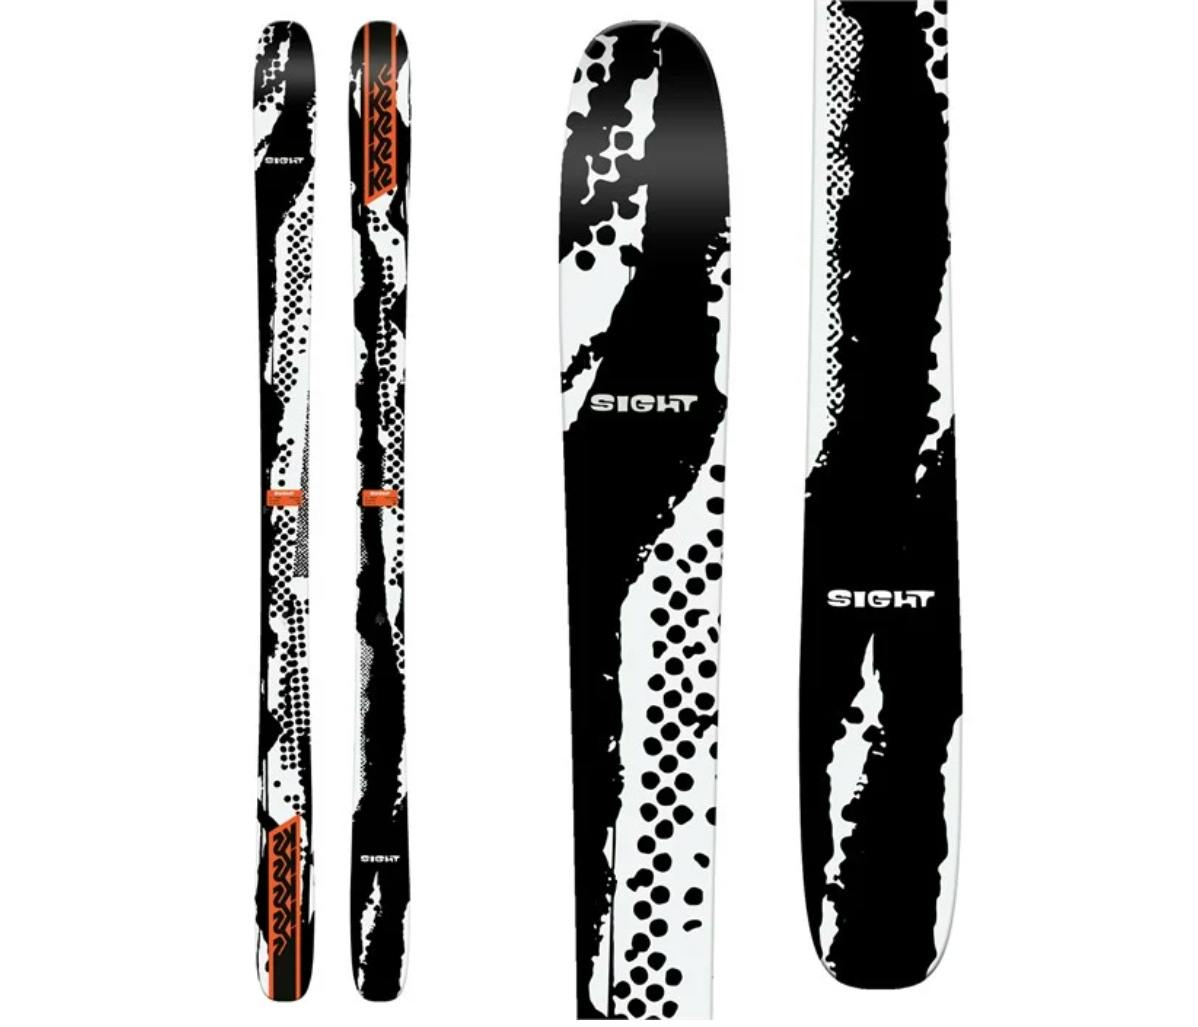 Product image of the 2023 K2 Sight Skis.